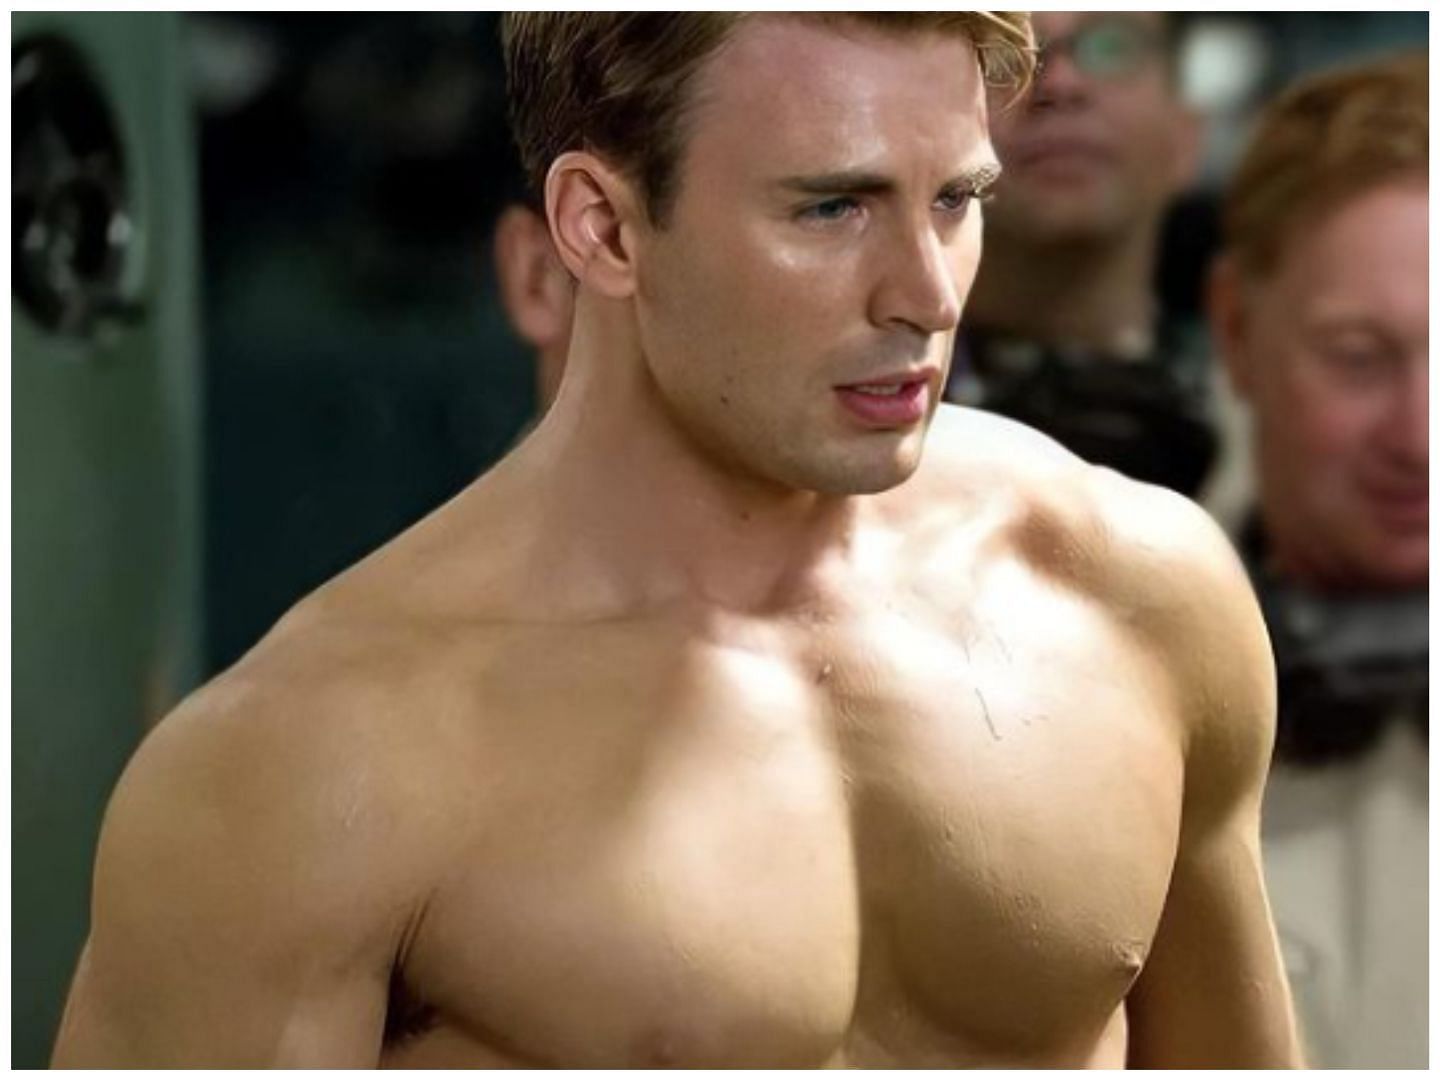 Chris Evans did a mix of bodyweight moves to work on his chest muscles. (Image via IG @teamchrisevans)